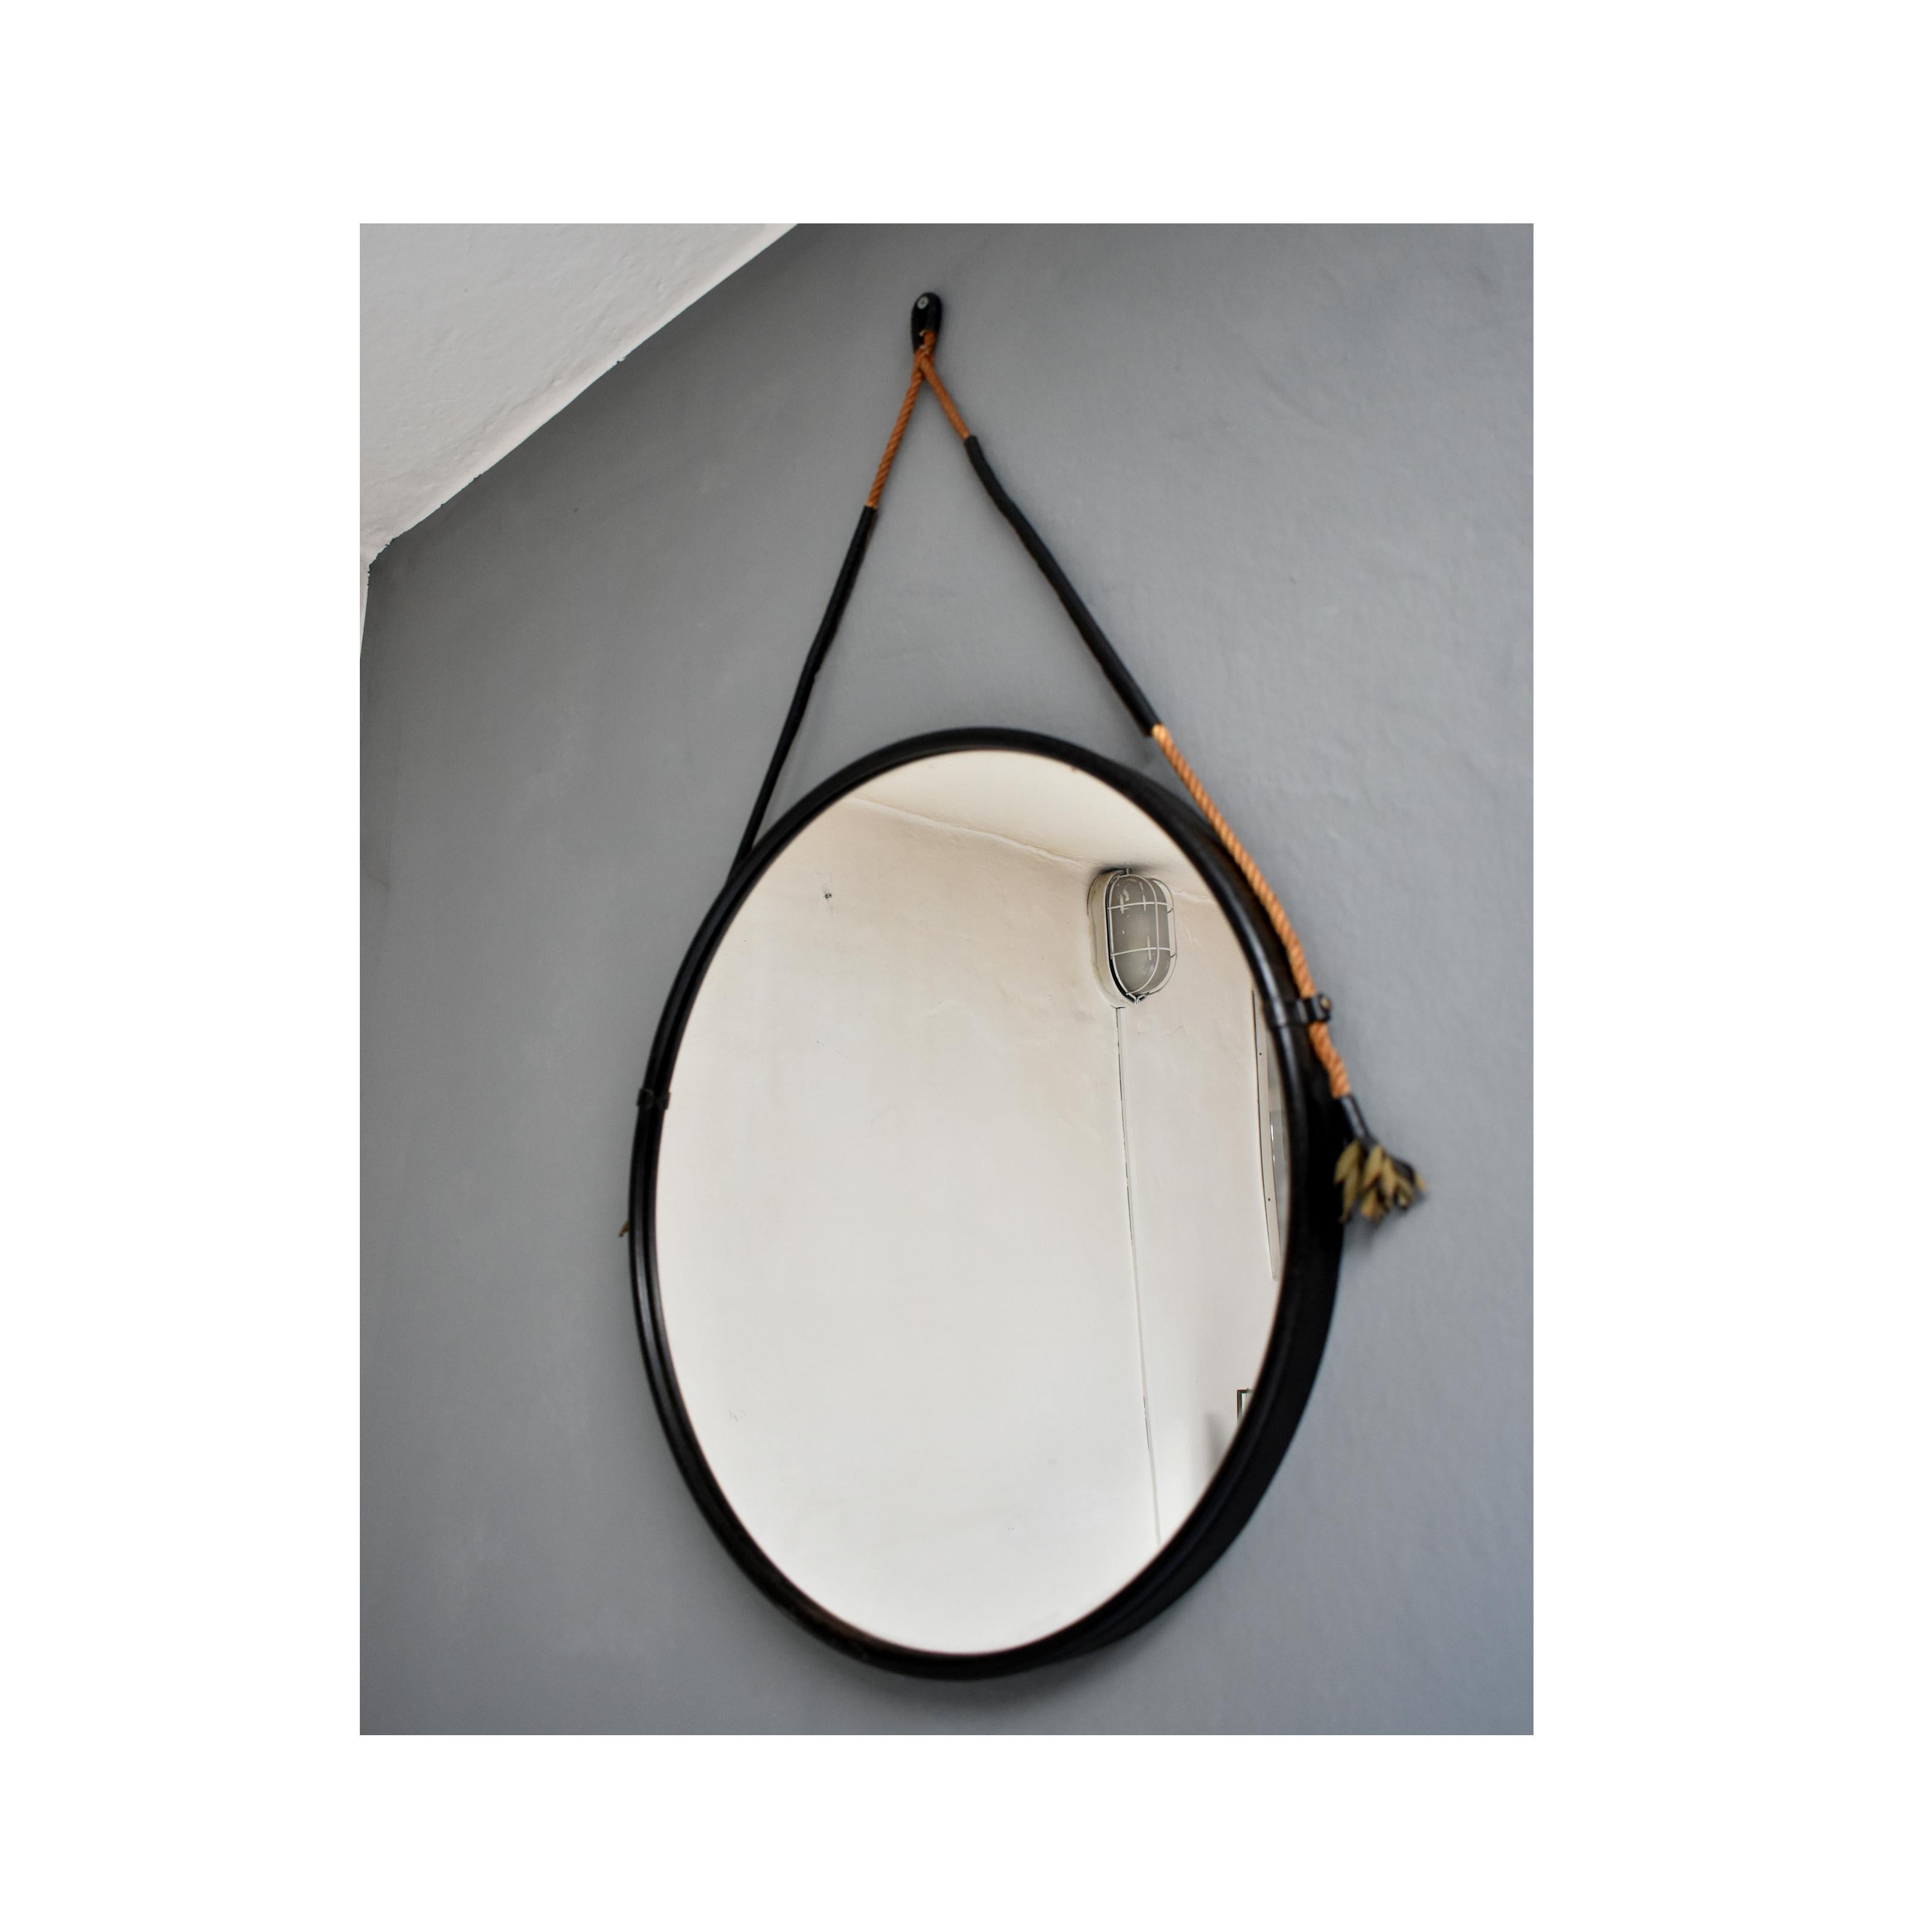 Italian Mid-Century Modern wall round mirror, 1960s
Available two pieces
Round wall mirror.
The mirrors have a black iron frame and a rope for hanging on the wall.
Very good condition, slight traces of time
Measurements in cm 50 x 87 H.